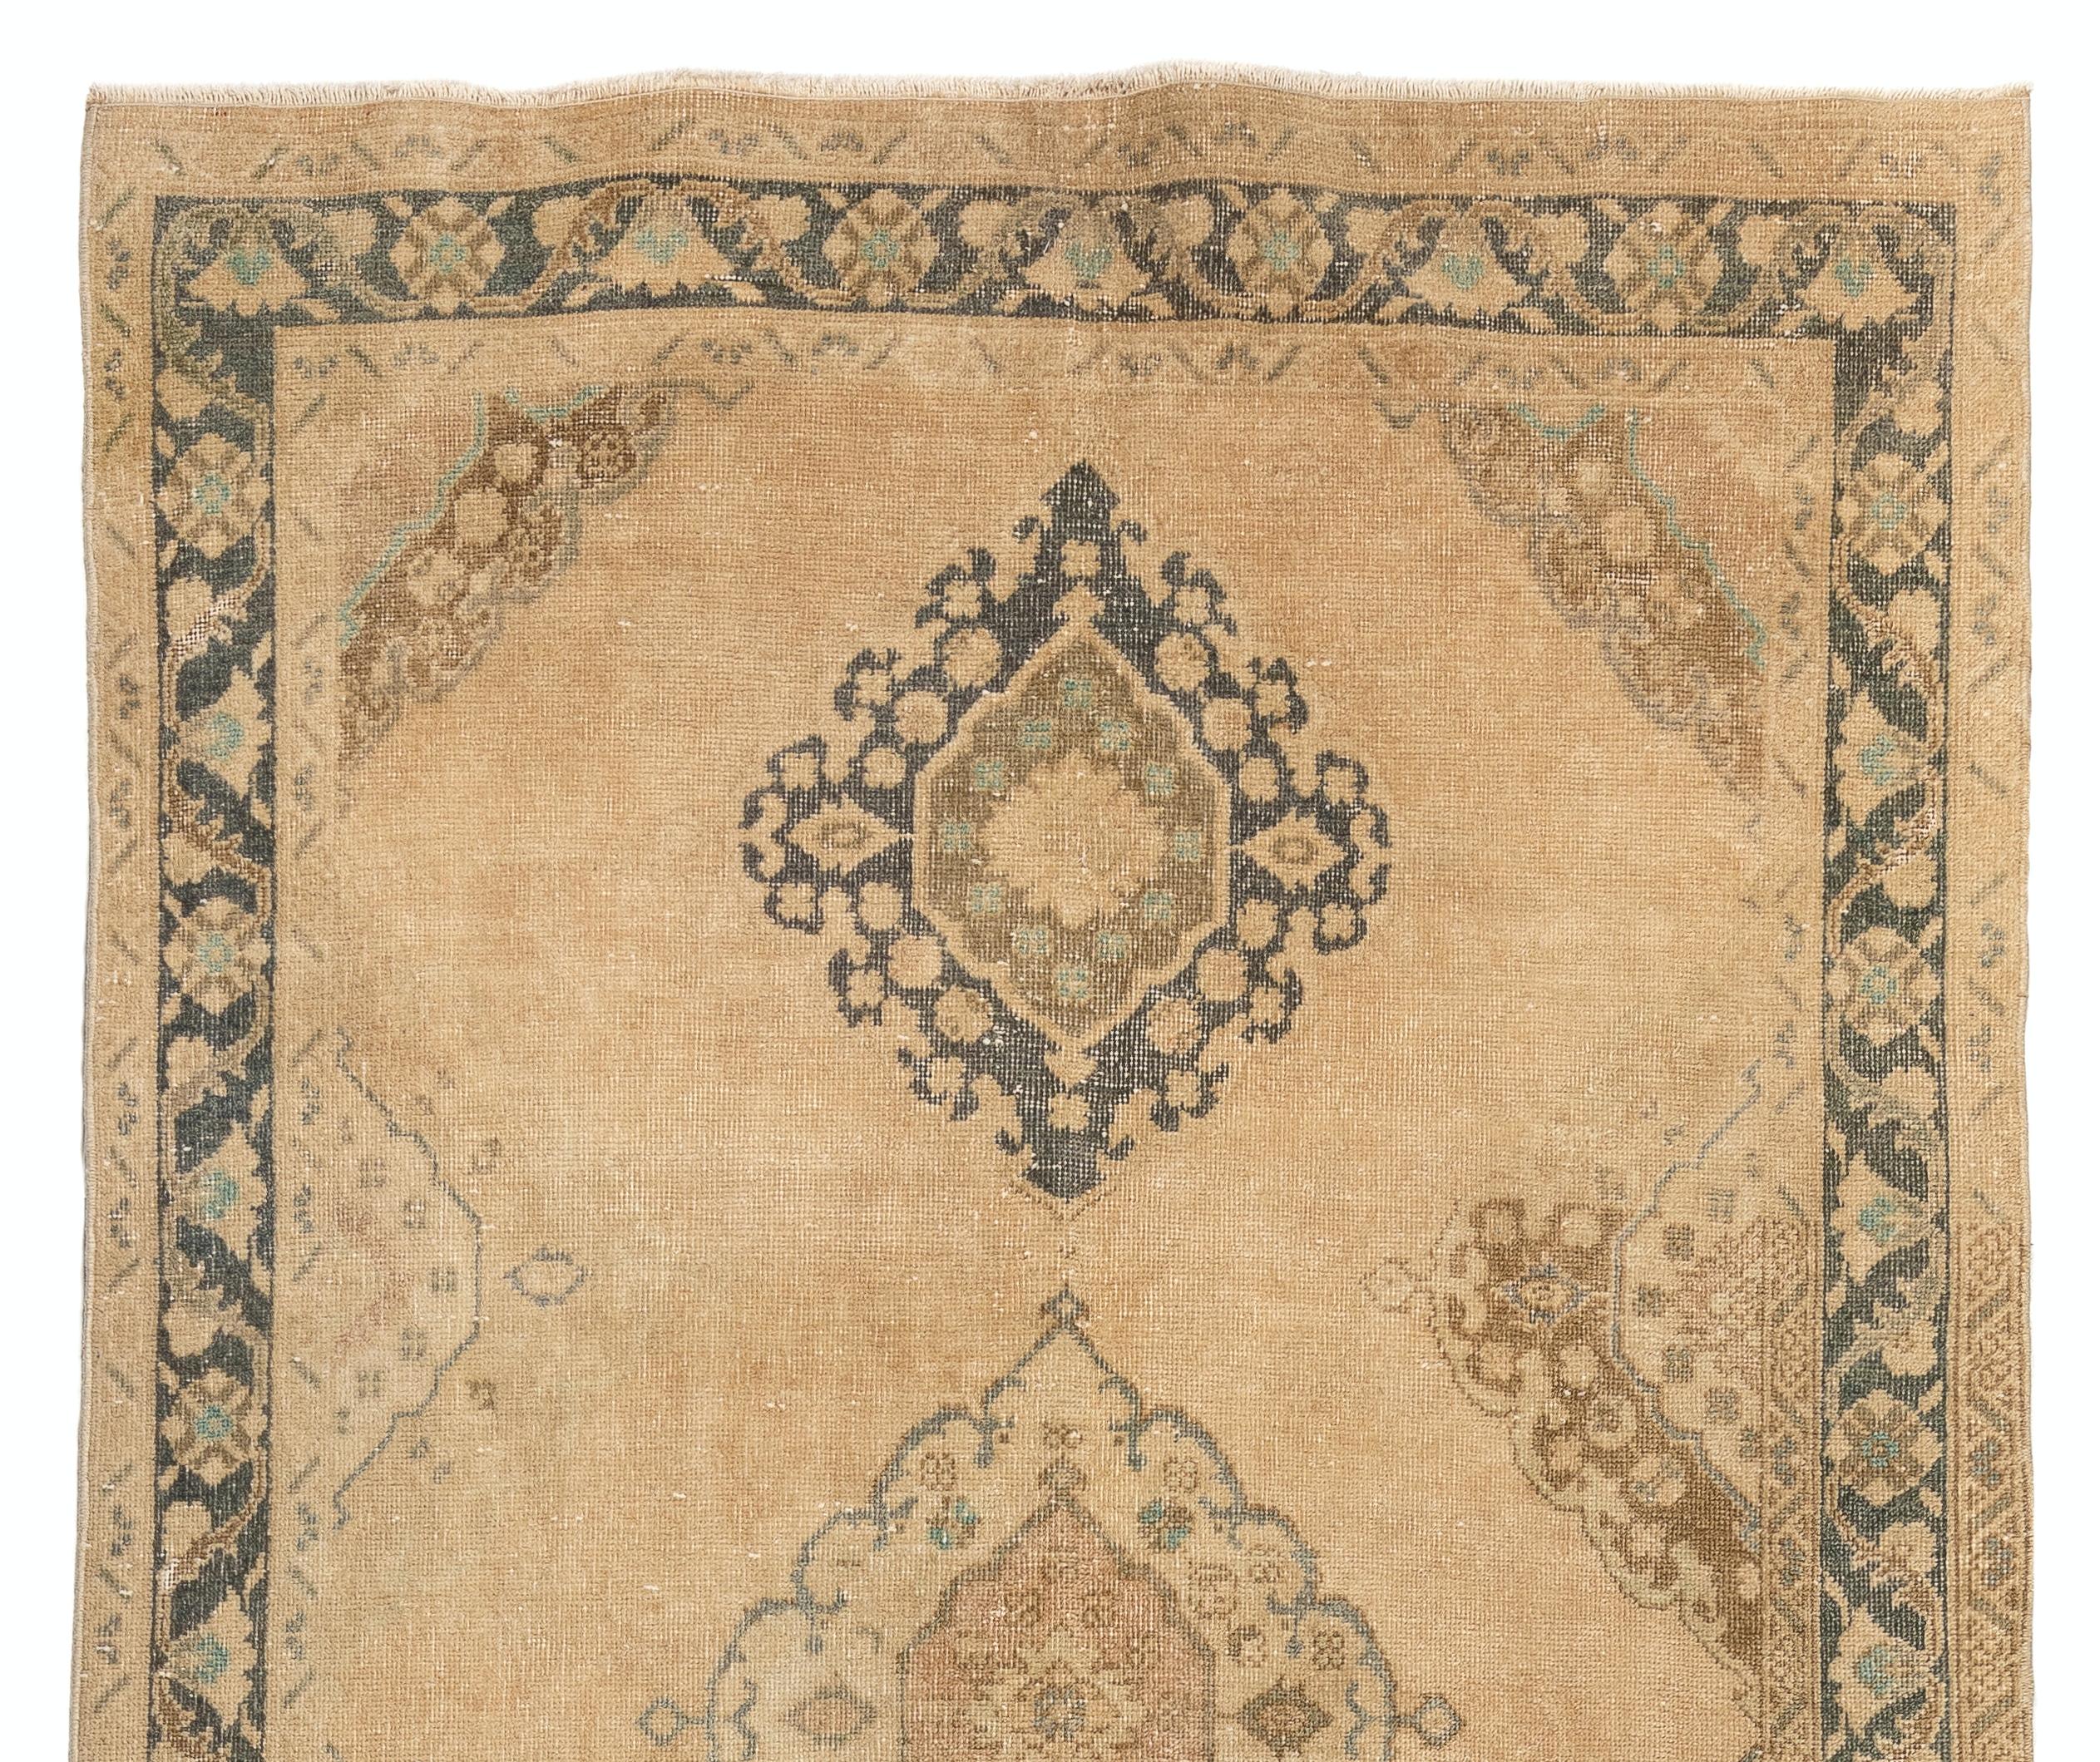 A vintage Turkish runner rug in soft, warm golden sand color with touches of moss green, teal, brownish pink and charcoal gray, featuring a well-drawn multiple linked medallions design. 

The rug was hand-knotted in the 1960s and has low wool on